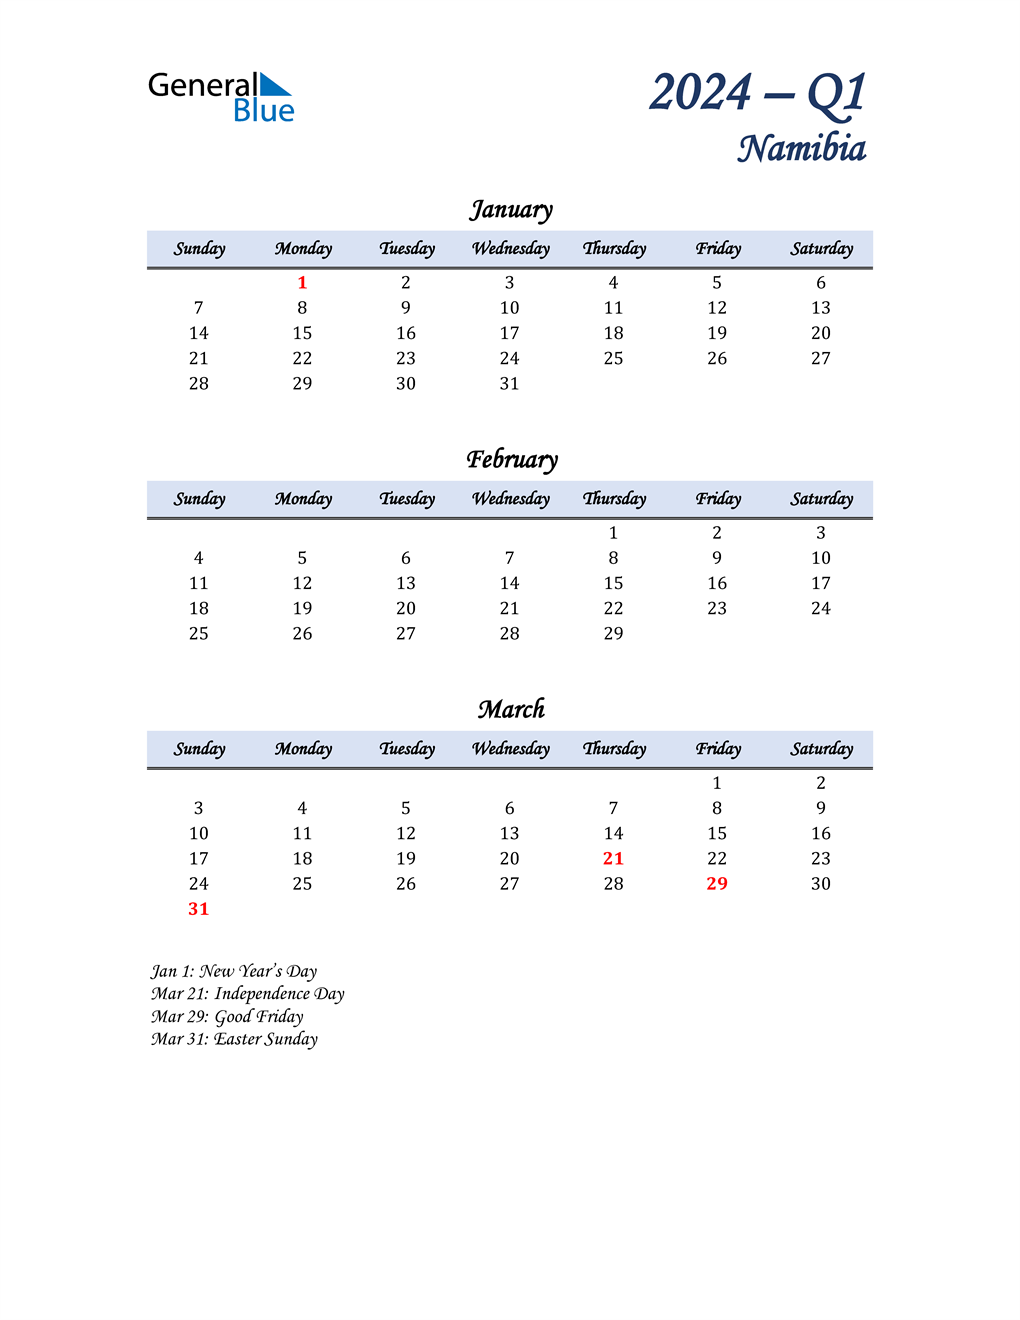  January, February, and March Calendar for Namibia